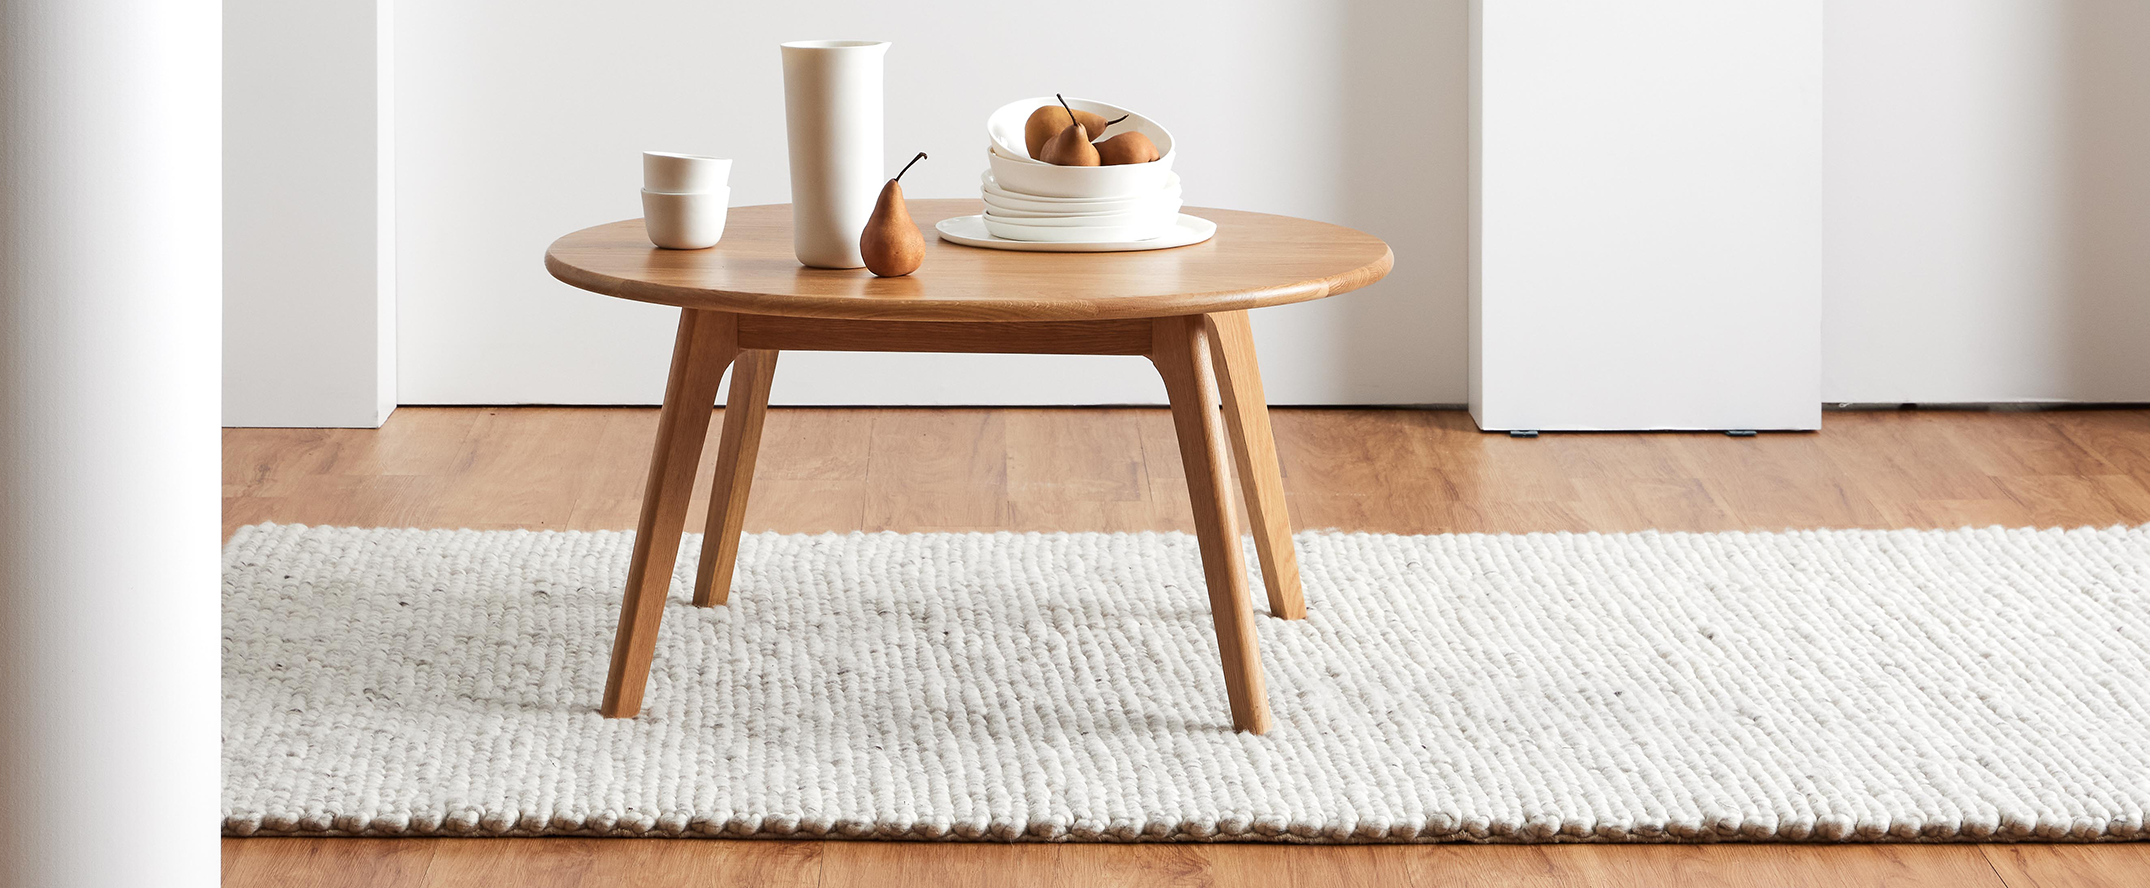 Scandinavian-Style Rugs: What To Look For